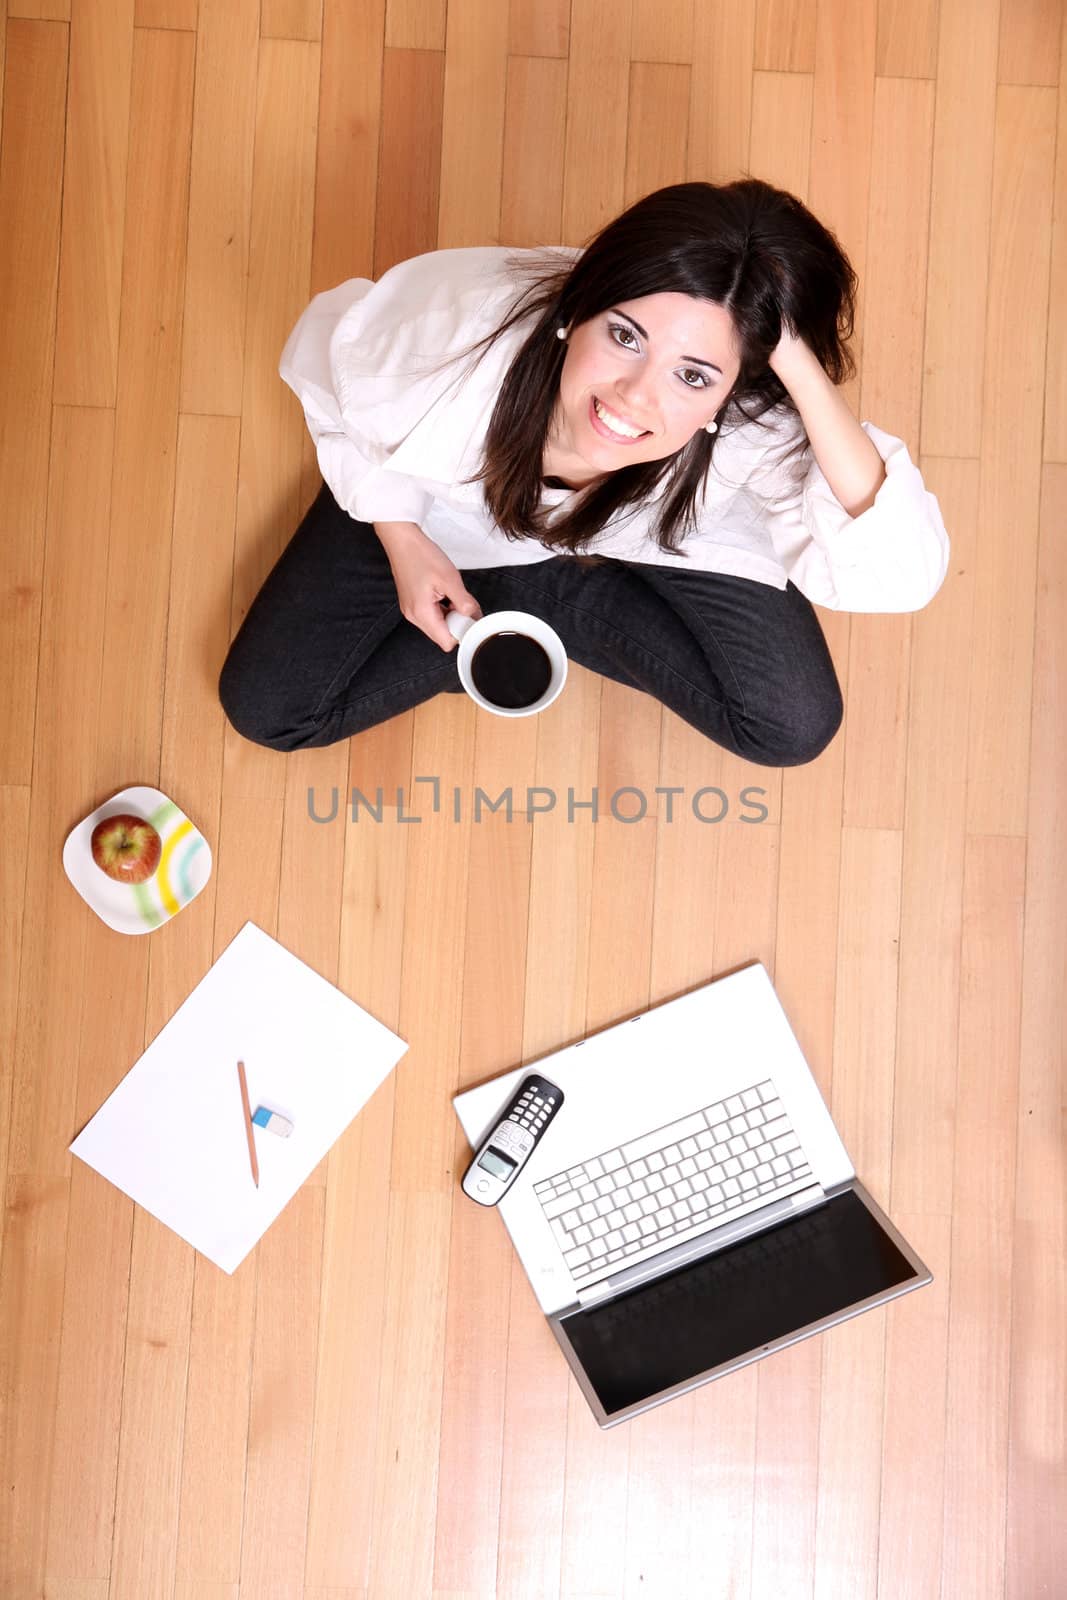 A young adult woman studying on the floor.